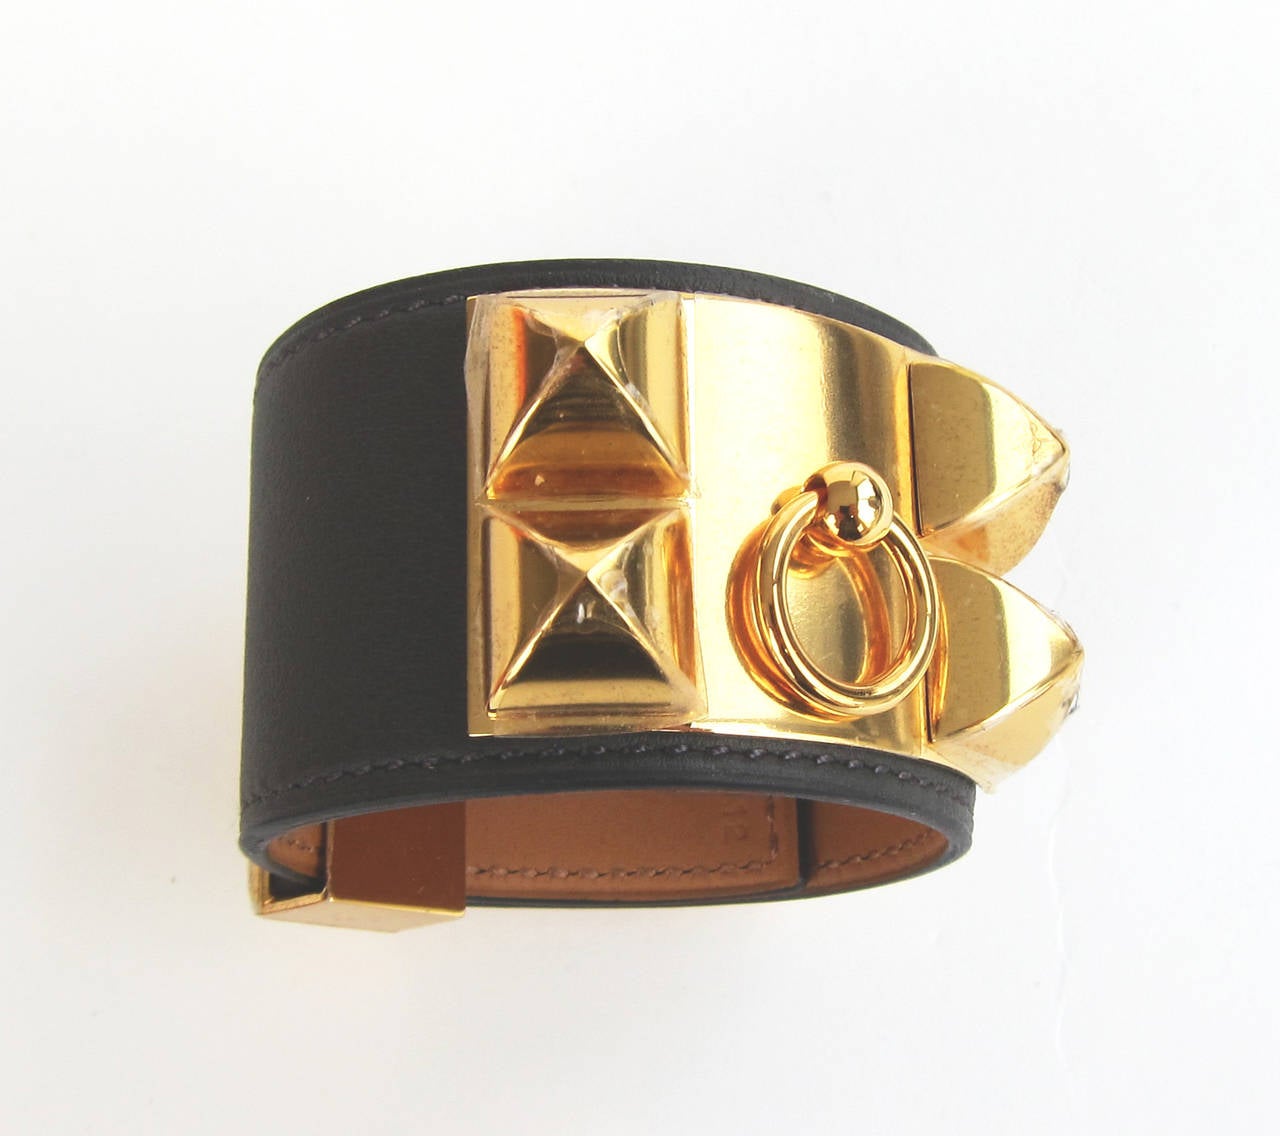 Hermes Graphite Swift Leather Collier de Chien CDC Bracelet Gold Fabulous

Brand new in box. 
Coming full set with Hermes box and ribbon. 
Adjustable ladies' size S.
Don't miss this gorgeous and rare Graphite CDC with Gold Hardware!
Extremely